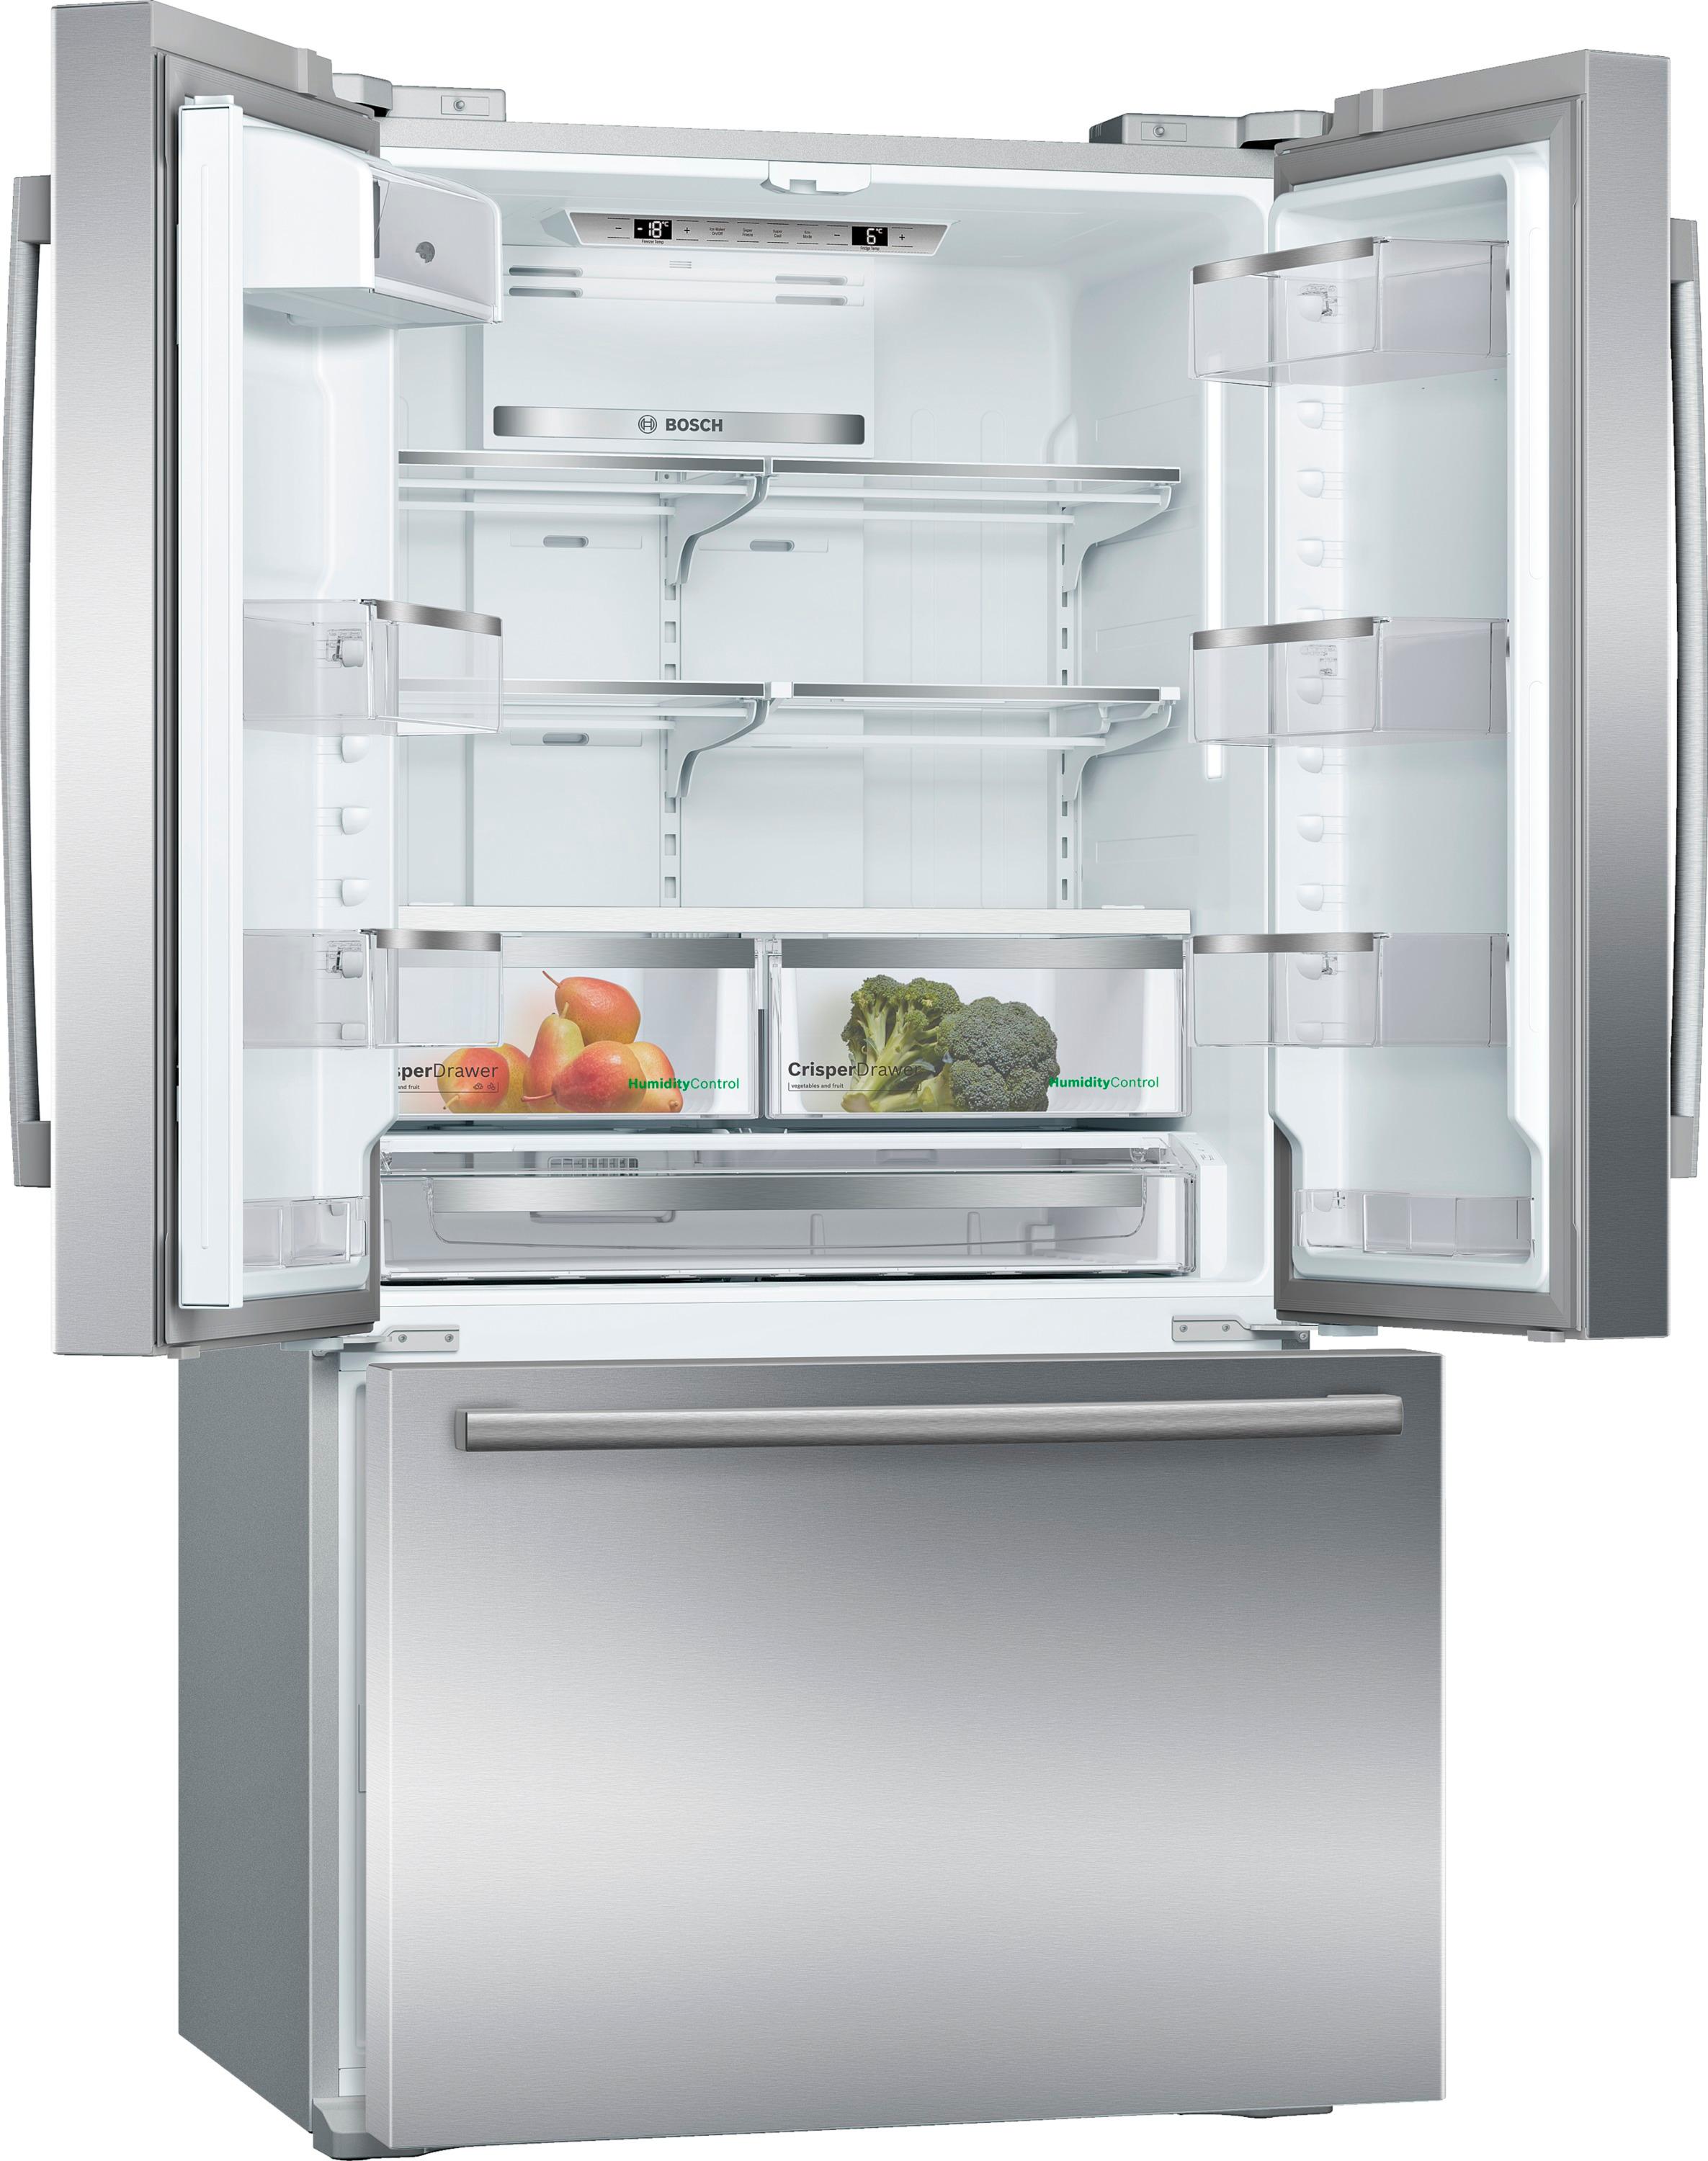 Questions and Answers: Bosch 800 Series 20.7 Cu. Ft. Bottom-Freezer ...